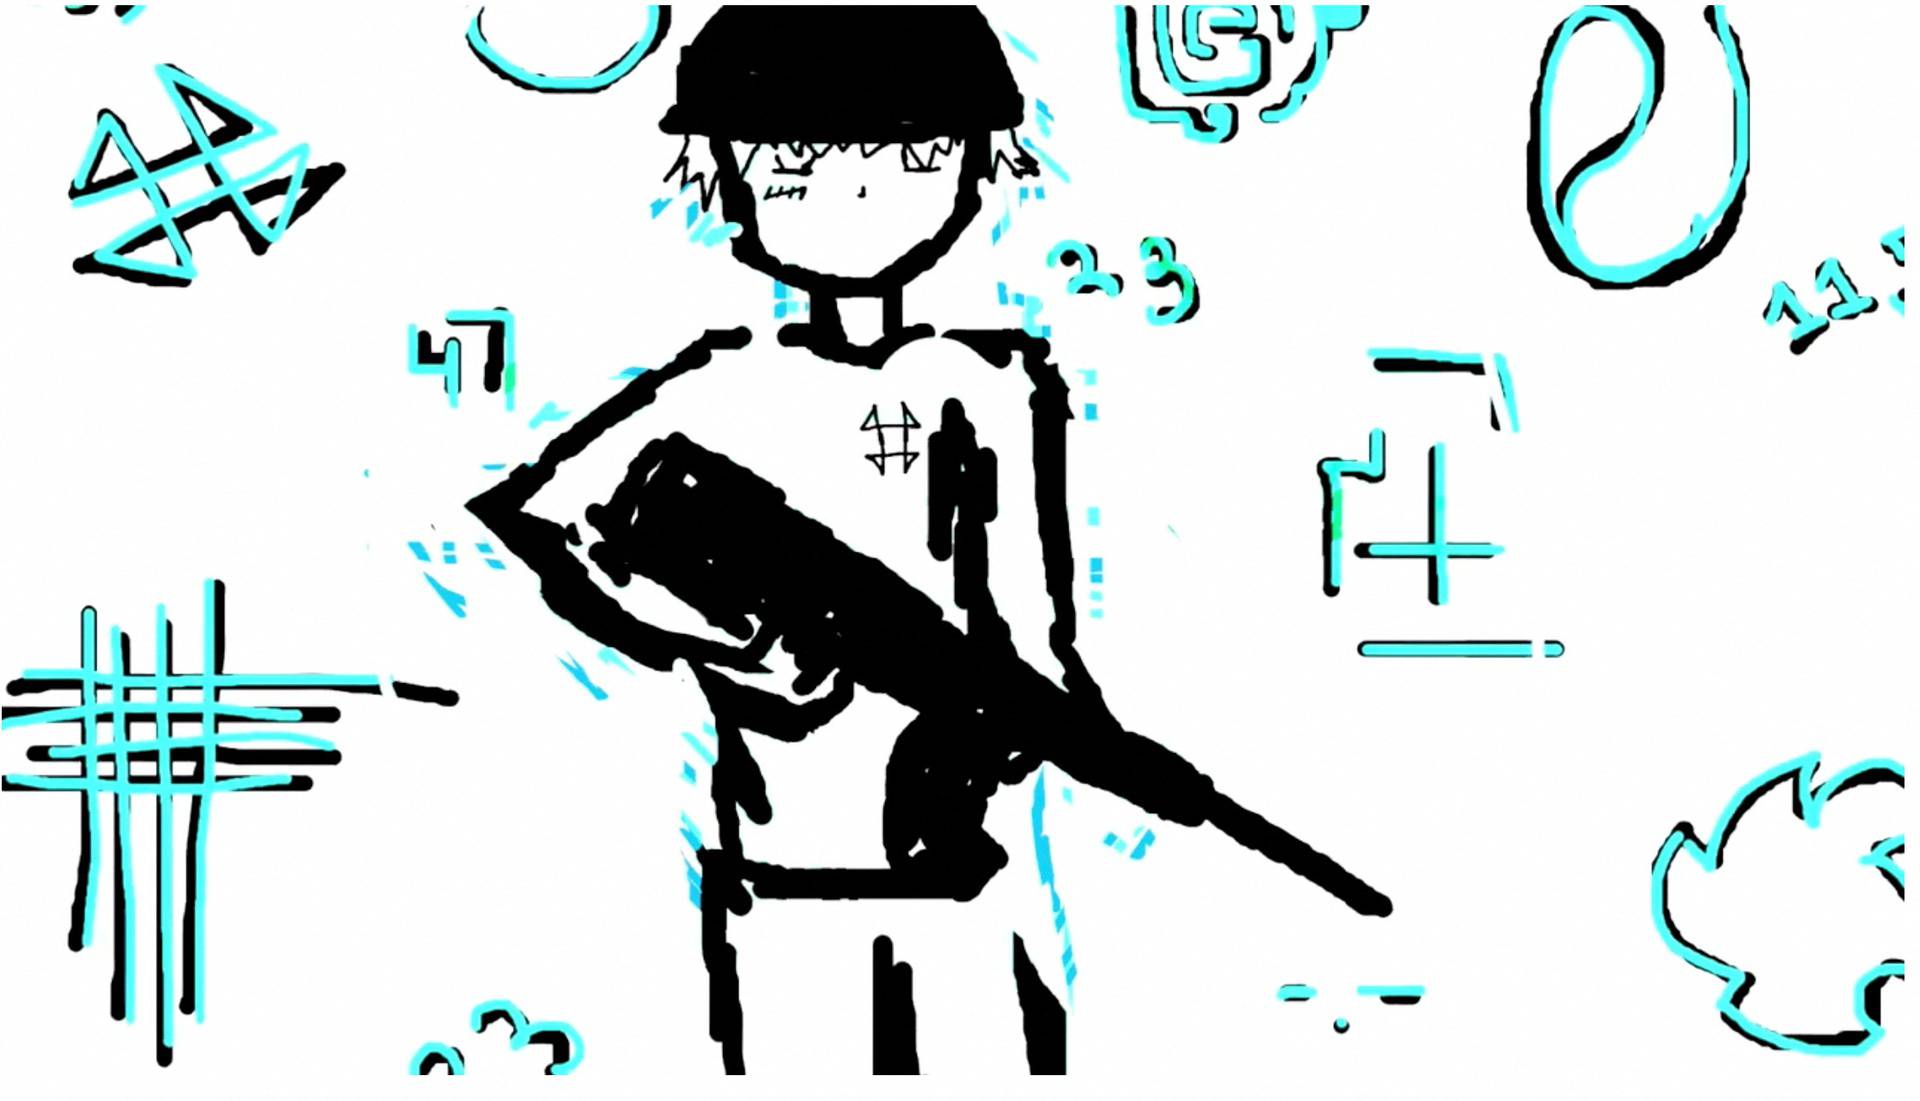 A drawing of a person holding a gun is seen in this still image taken from a video uploaded by Robert (Bob) E. Crimo III